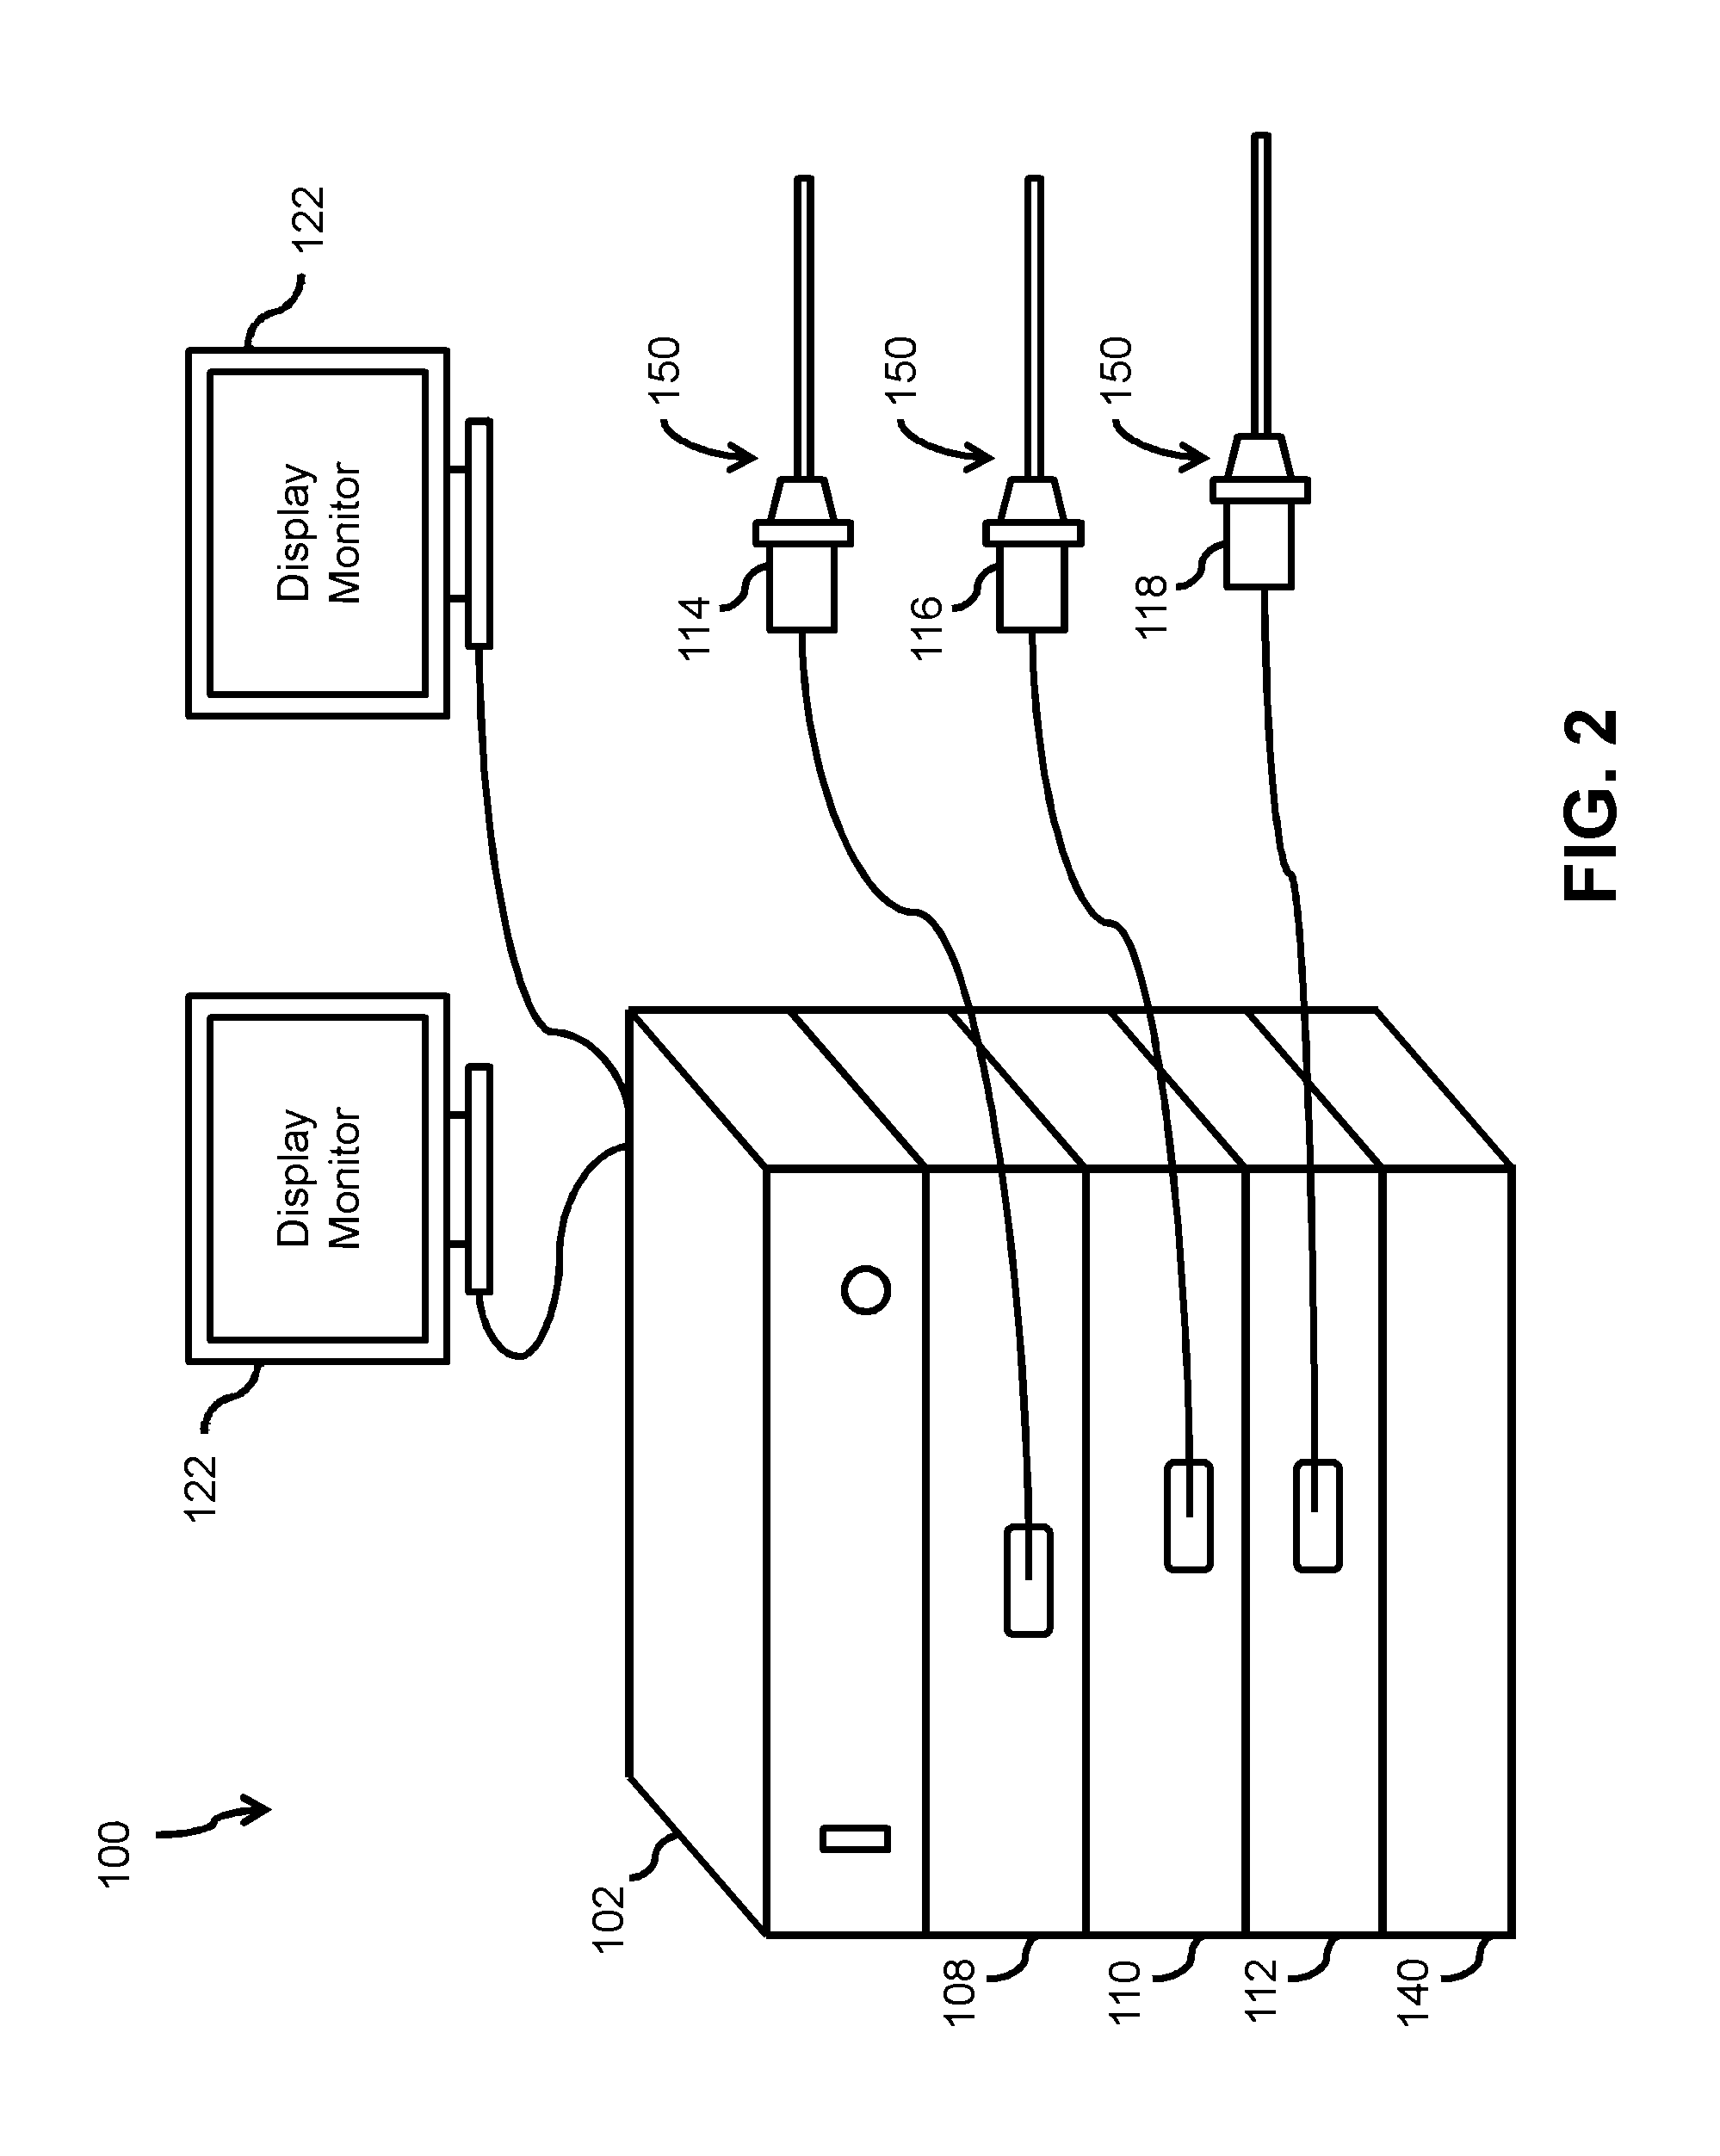 Video Imaging System With Multiple Camera White Balance Capability